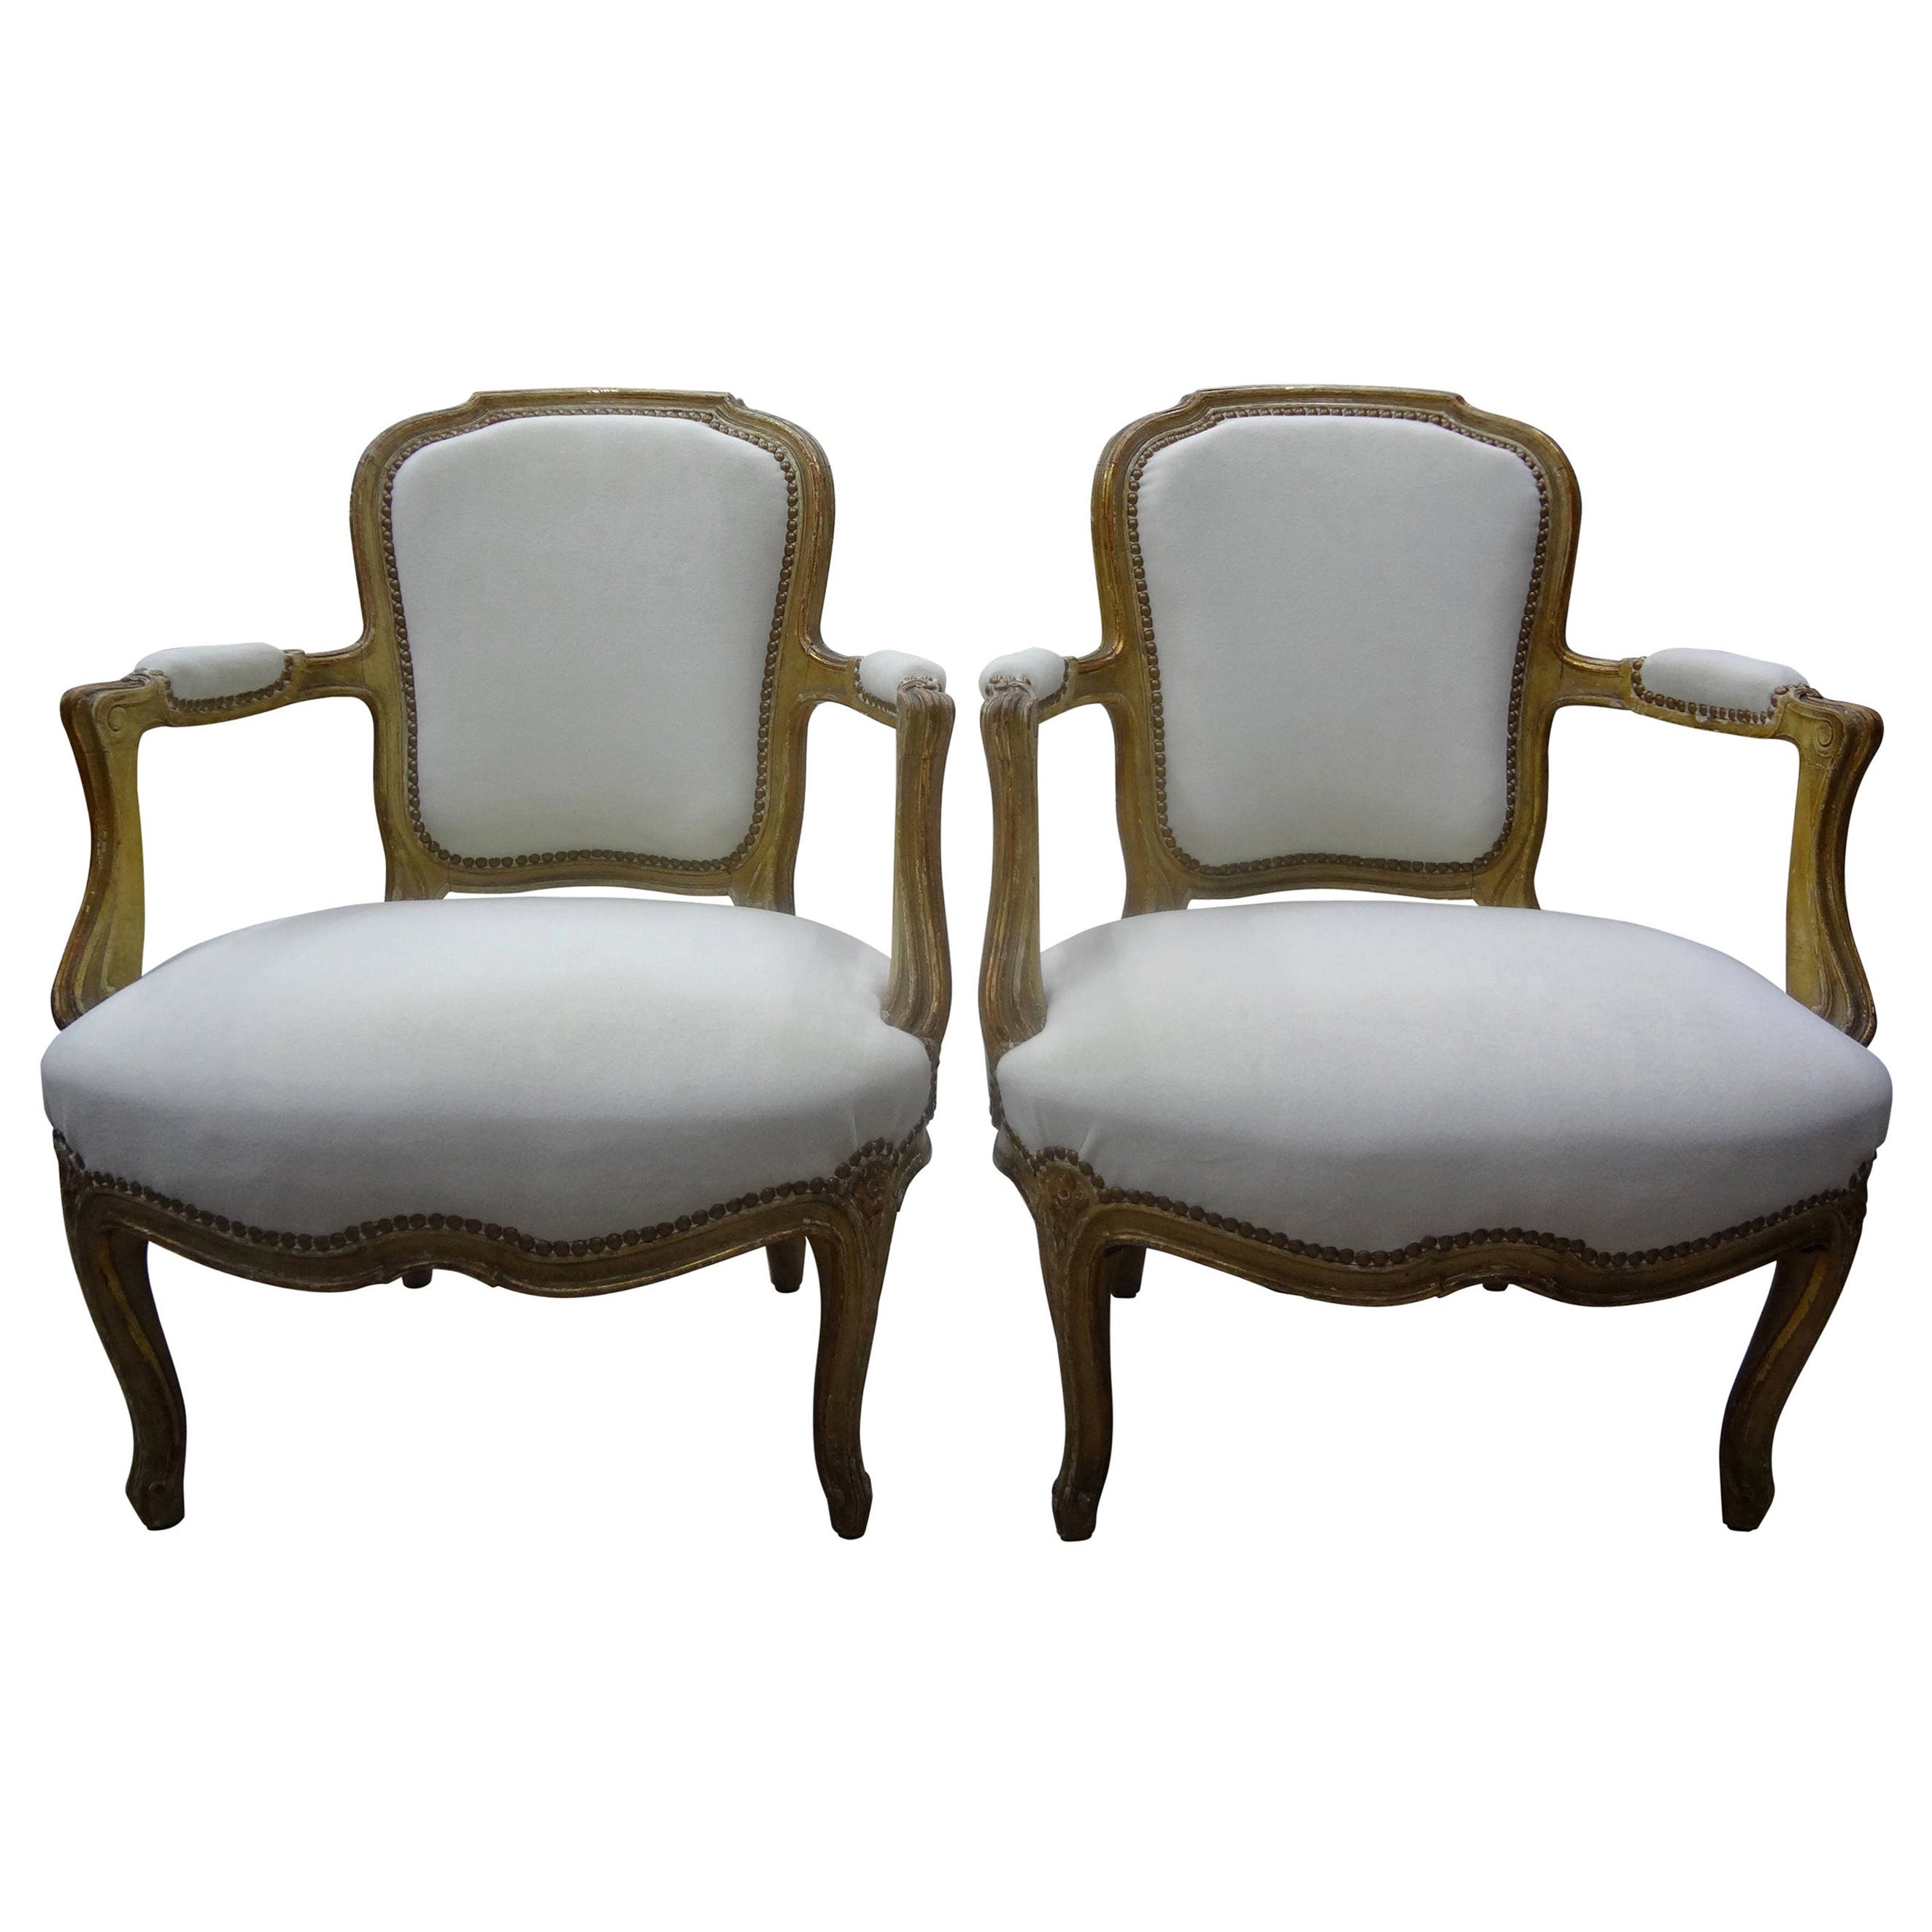 Pair of 19th Century French Louis XVI Style Chairs For Sale